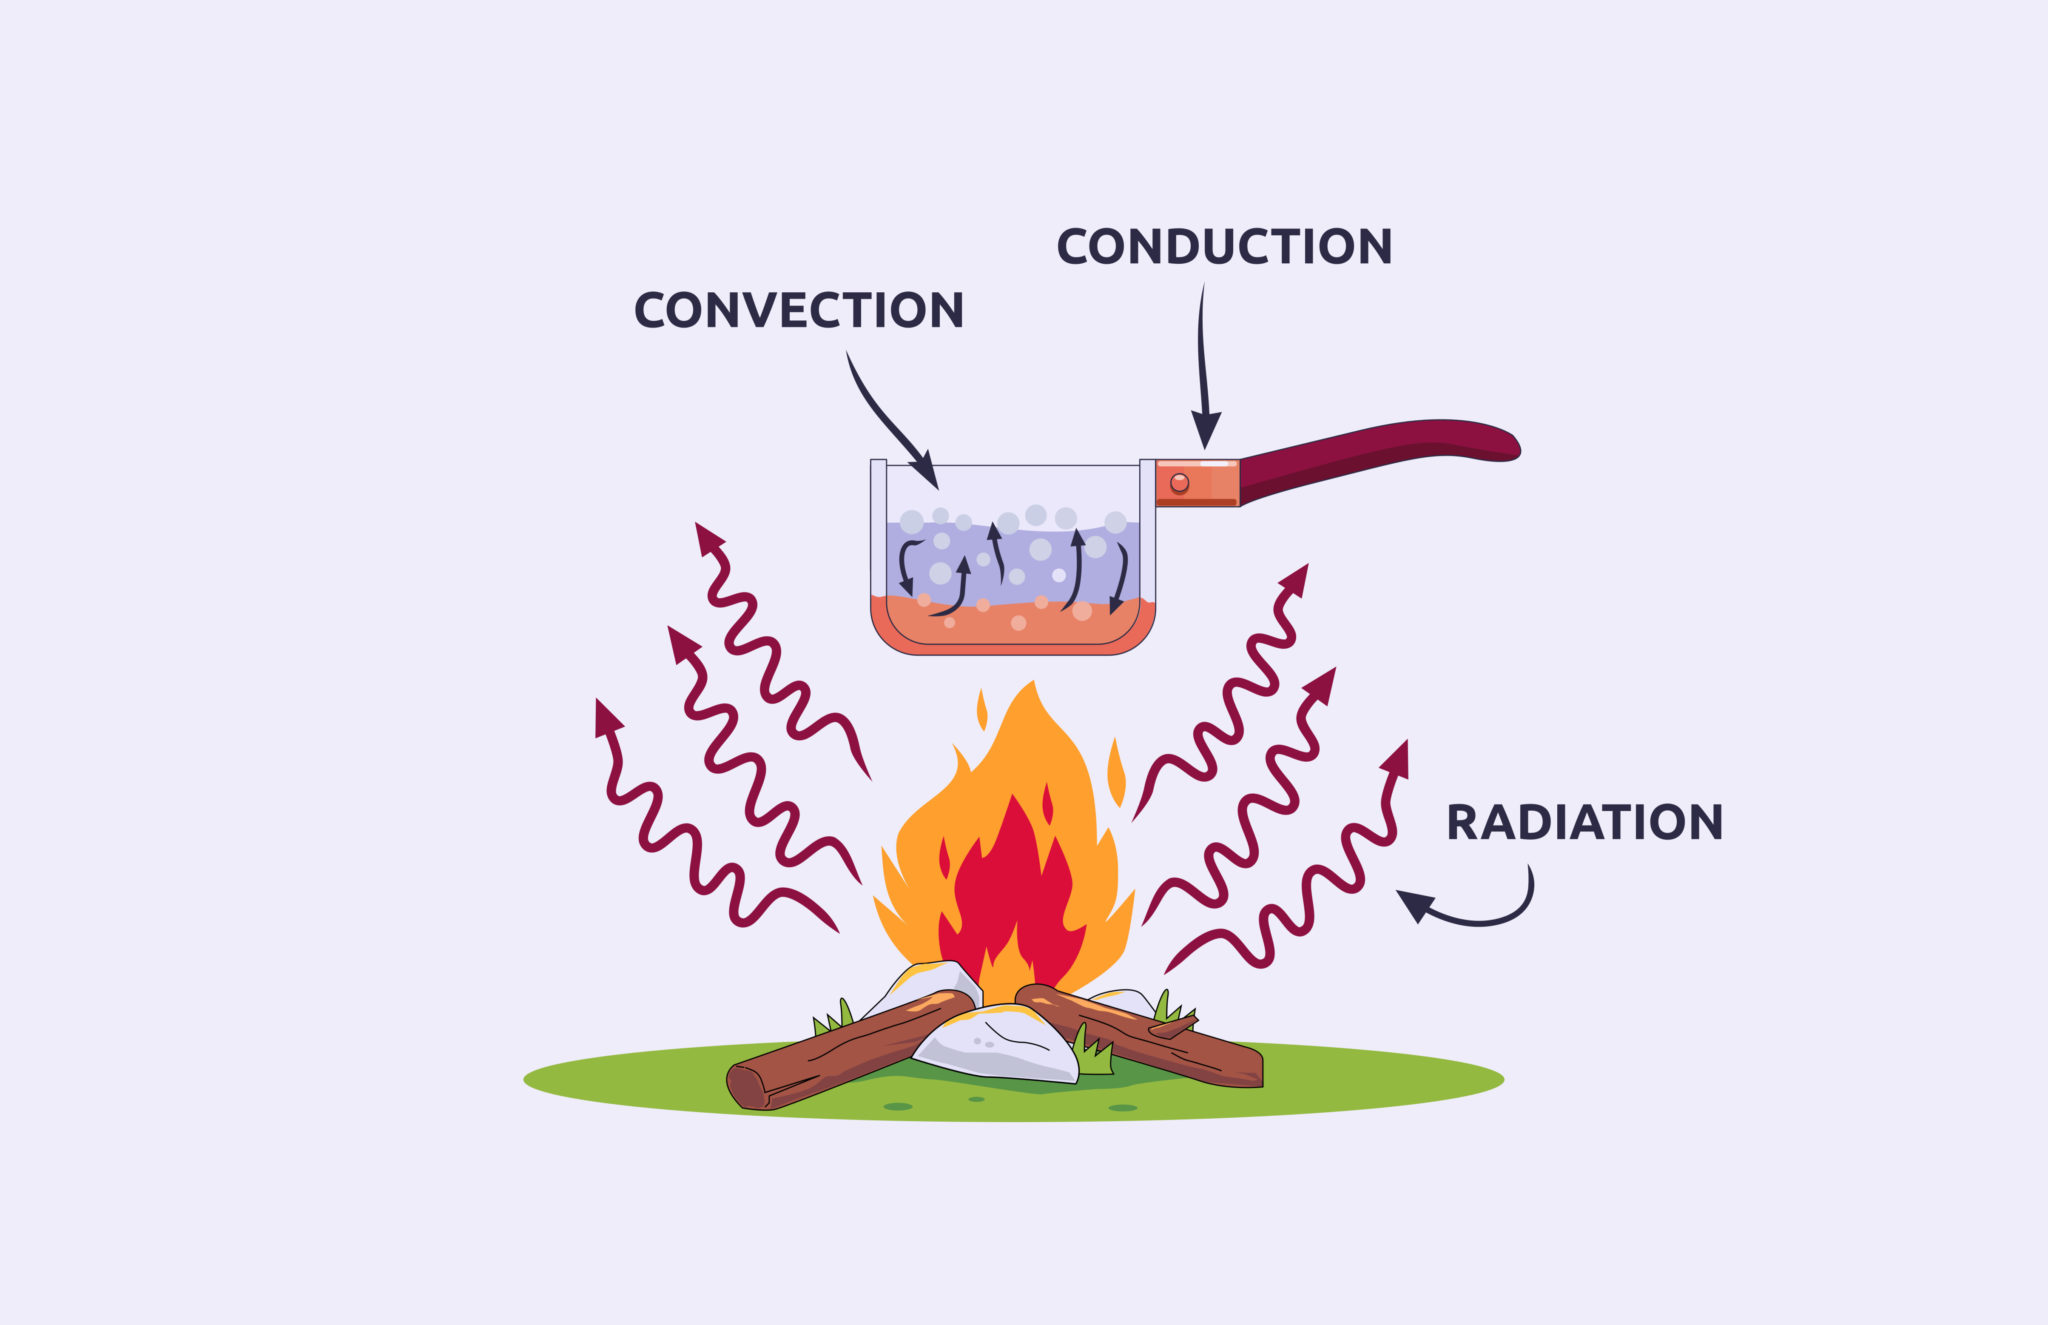 Diagram showing convection, conduction and radiation with the example of a camp fire